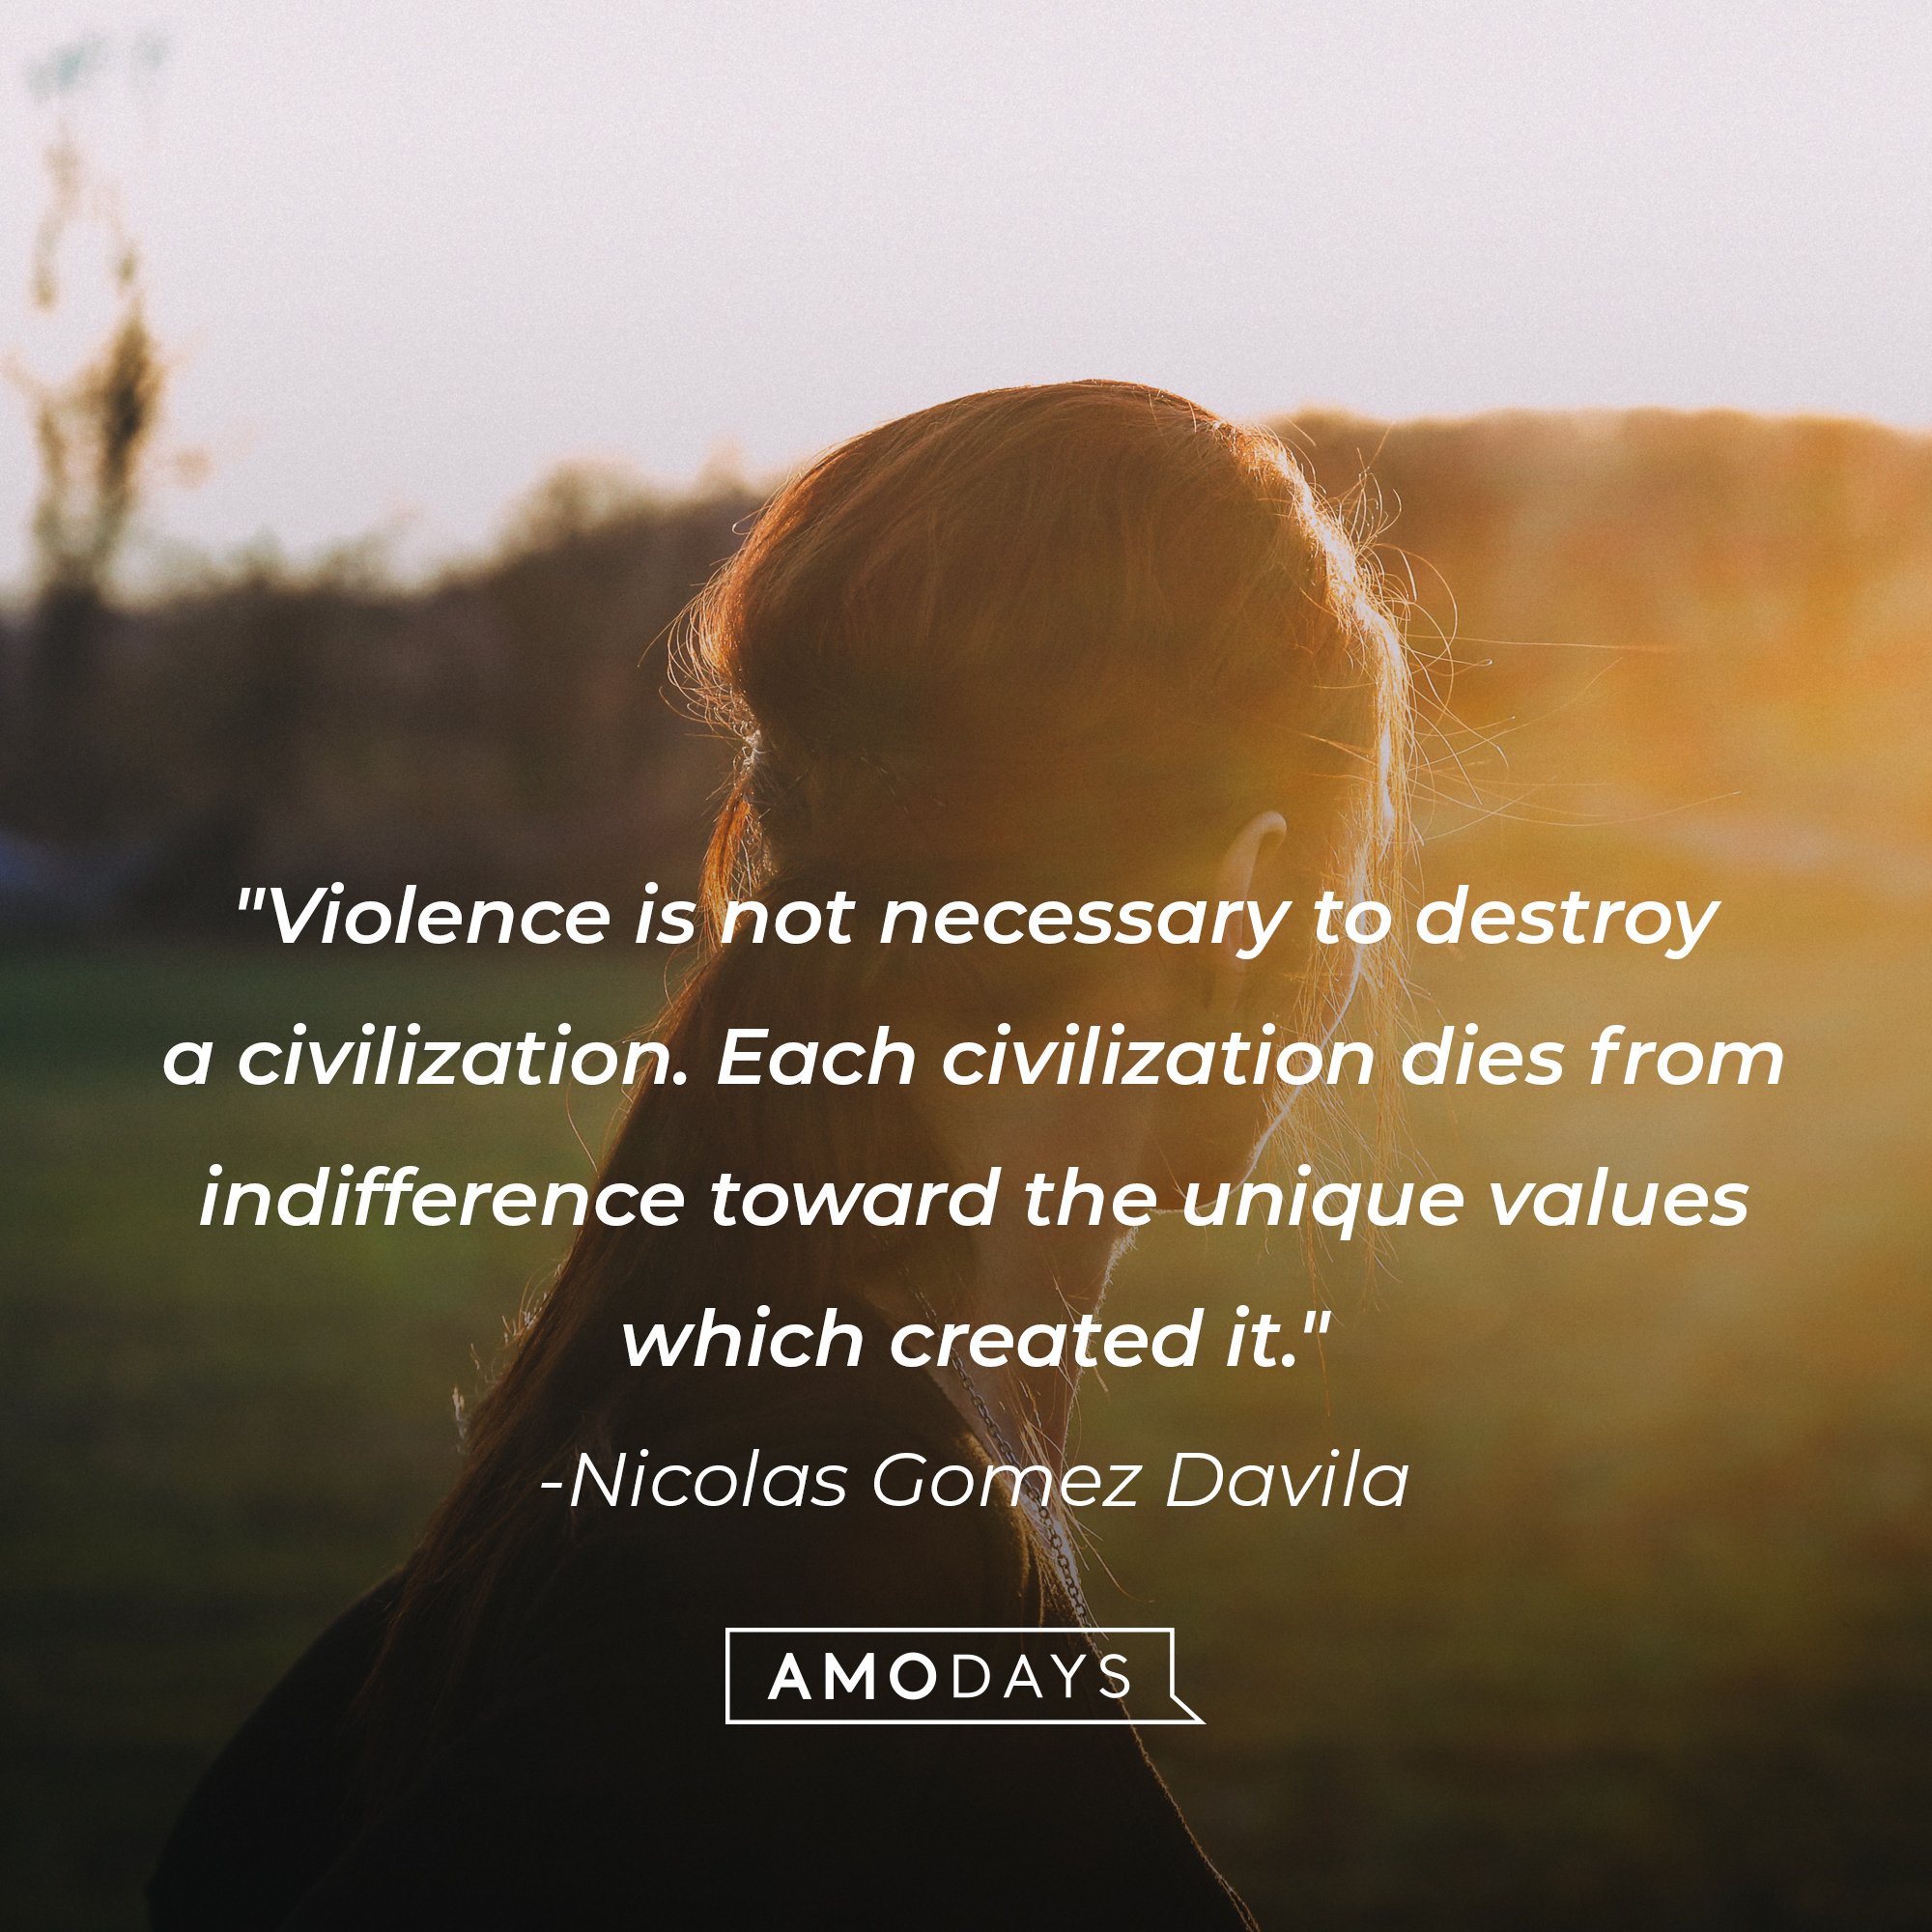 Nicolas Gomez Davila's quote: "Violence is not necessary to destroy a civilization. Each civilization dies from indifference toward the unique values which created it." | Image: AmoDays